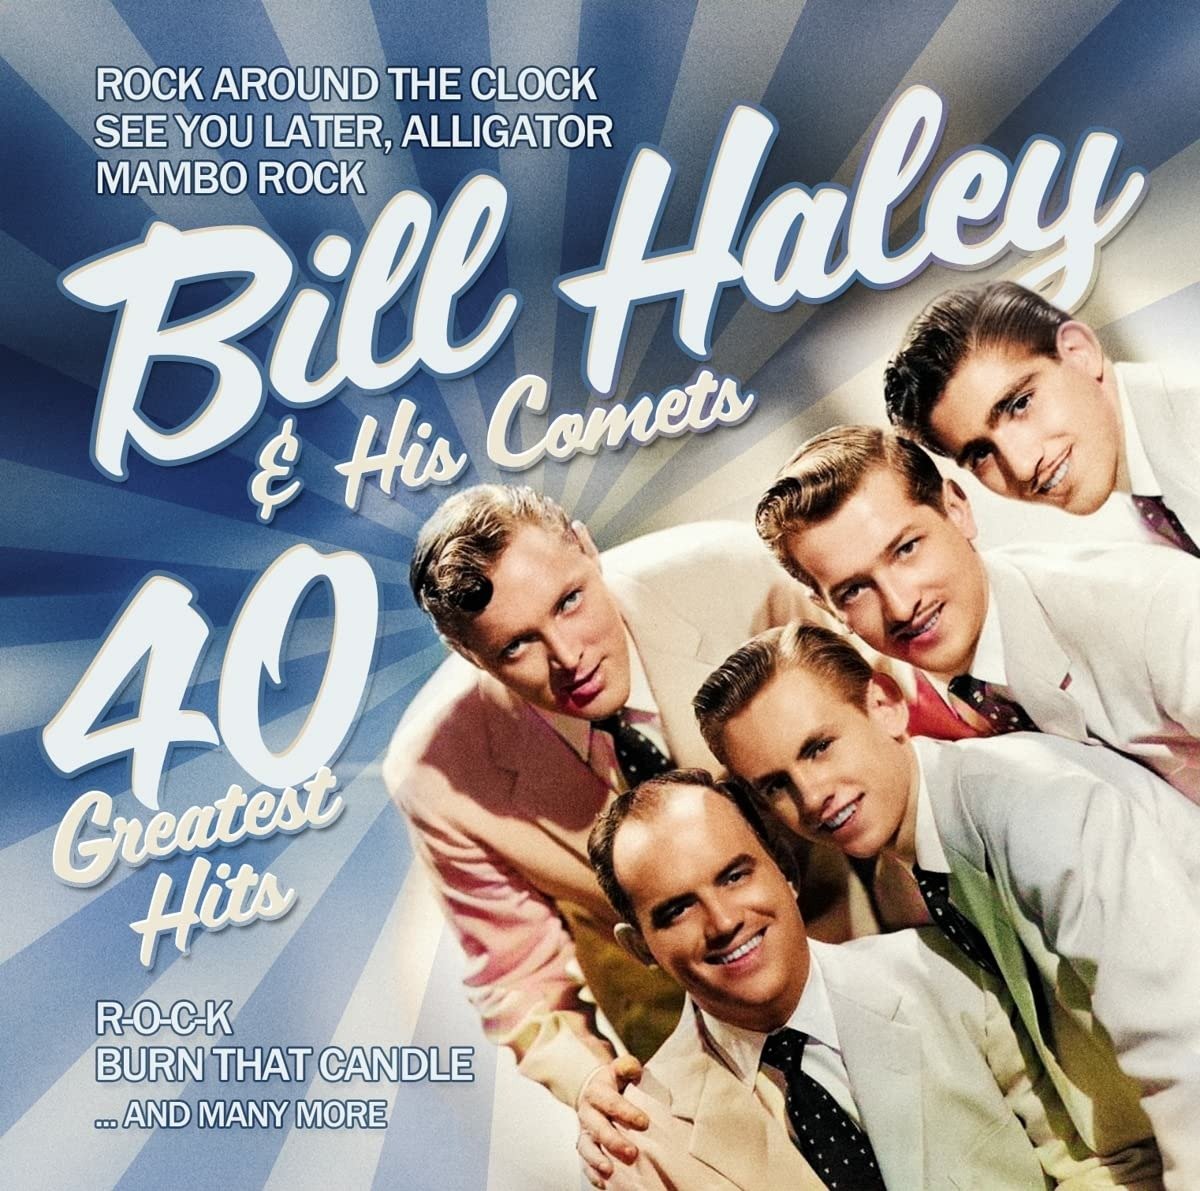 CD Shop - HALEY, BILL & HIS COMETS 40 GREATEST HITS